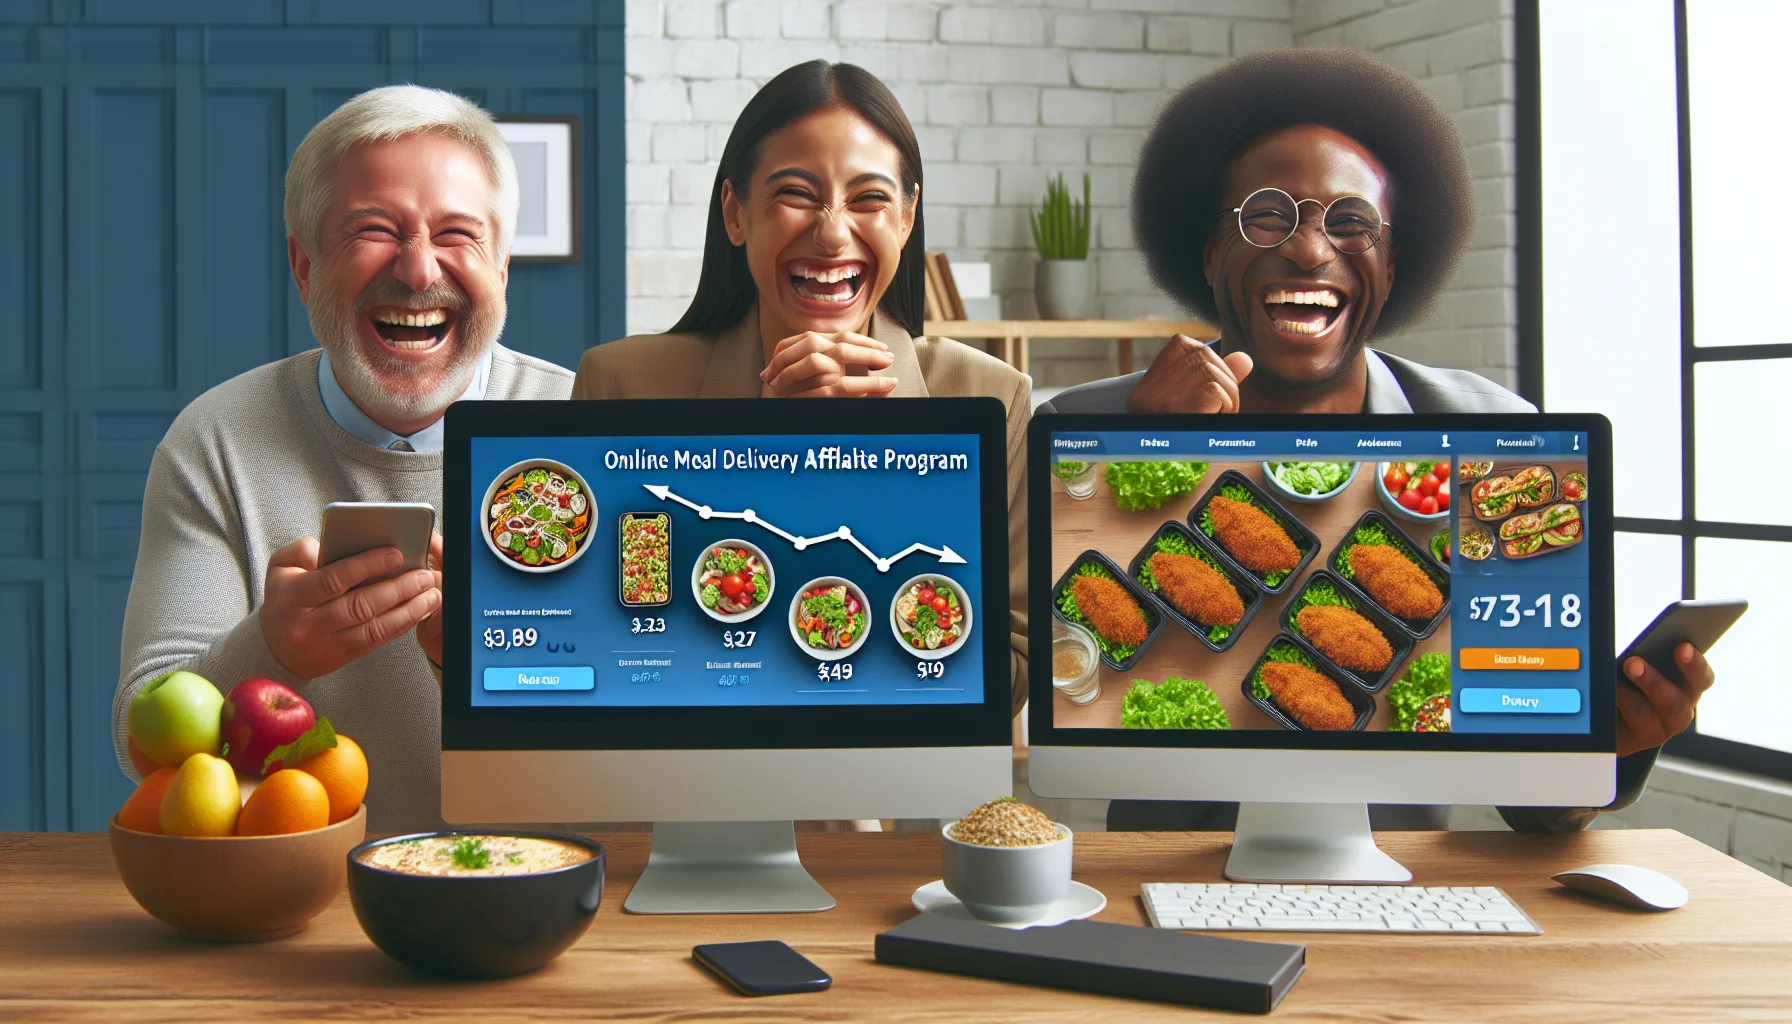 Create a humorous and realistic image focused on an online meal-delivery affiliate program. Picture it as being engaged in a delightful and attractive scenario related to online income generation. Show a synced computer display with increasing numbers, resembling growing revenue, and a second screen featuring the meal delivery platform's user-friendly interface with an assortment of healthy mouthwatering meals. Include diverse individuals, a middle-aged Caucasian man and a young Black woman, both smiling while engaging with the platform on their devices.